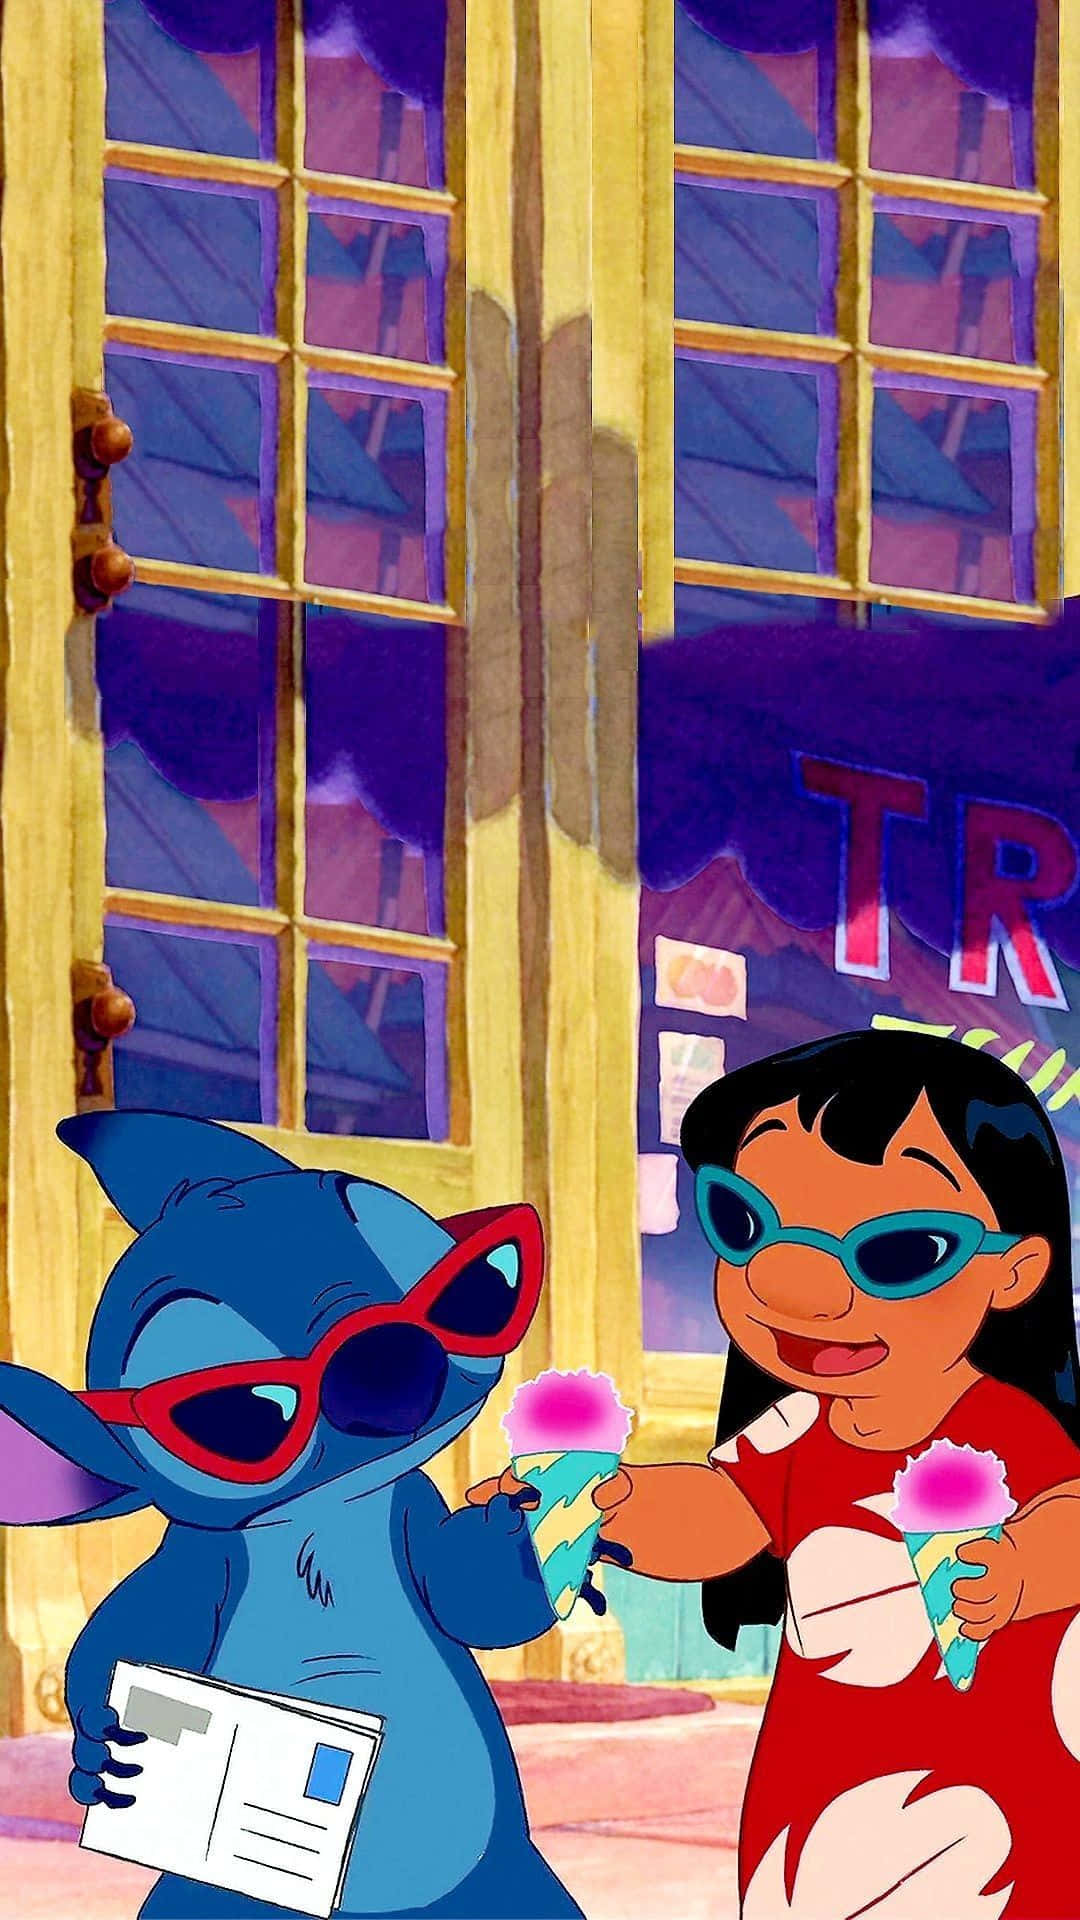 Stitch and Lilo have an unforgettable moment